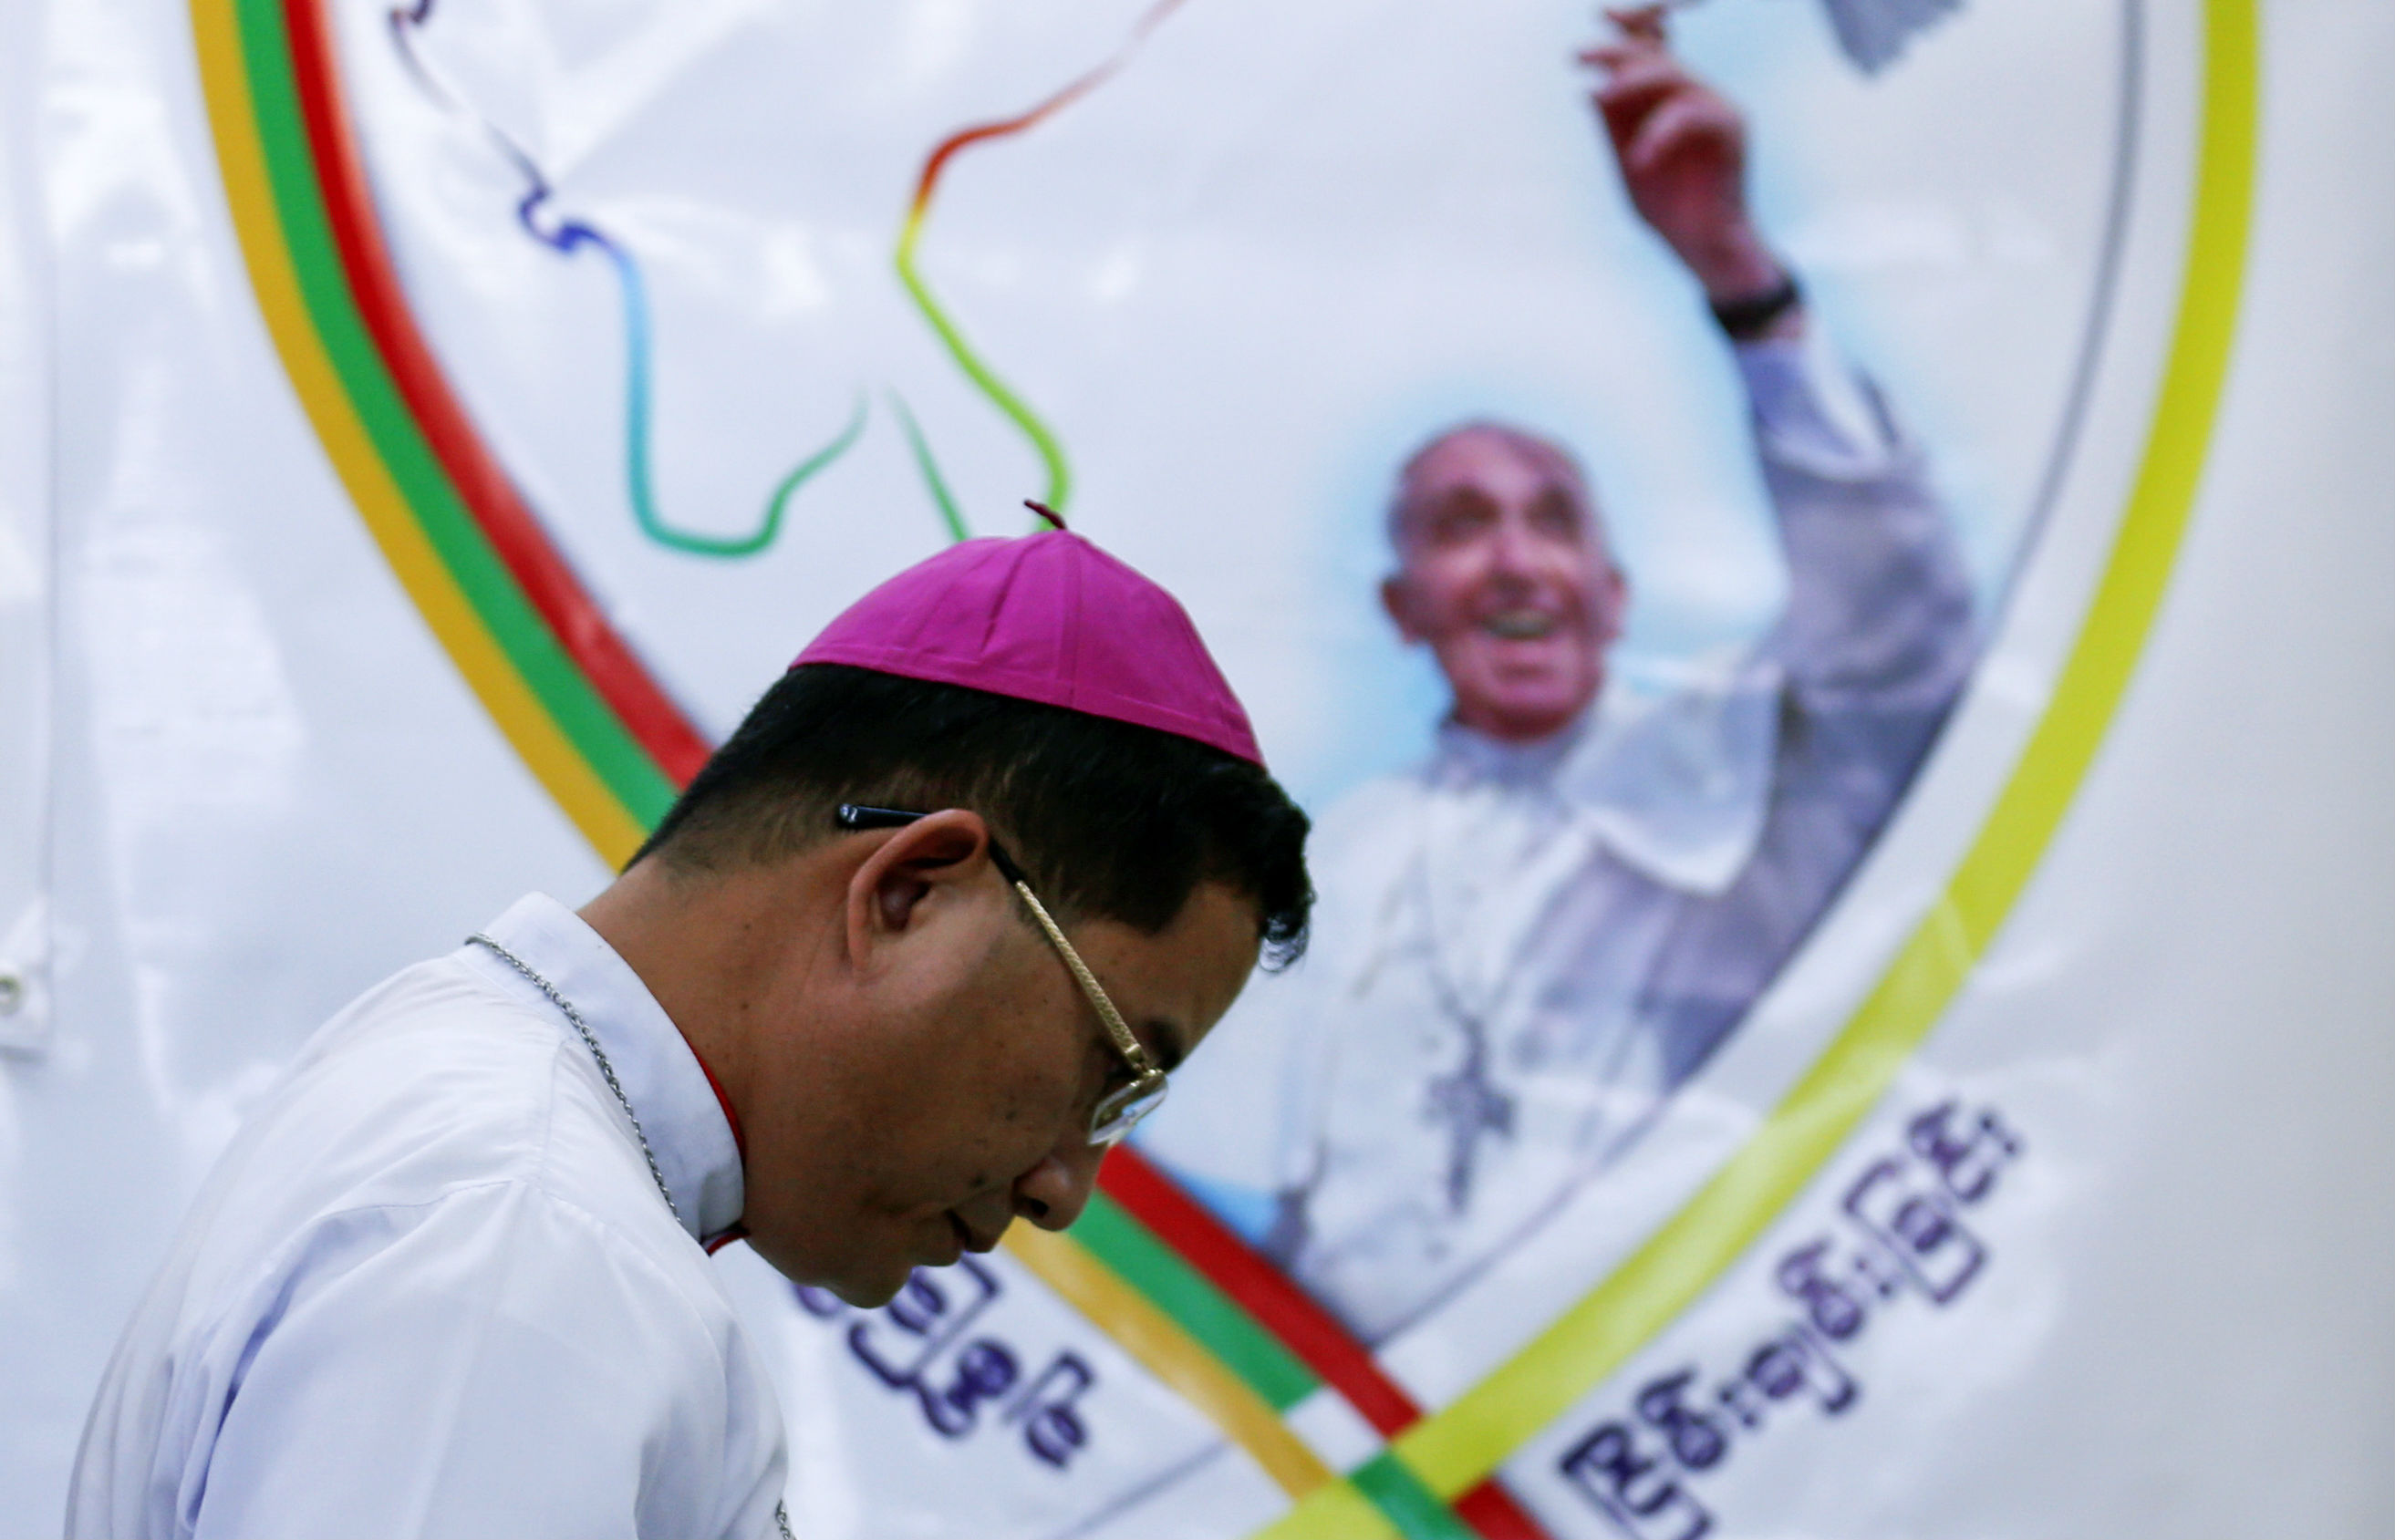 Vatican confirms first ever papal visit to Myanmar in November